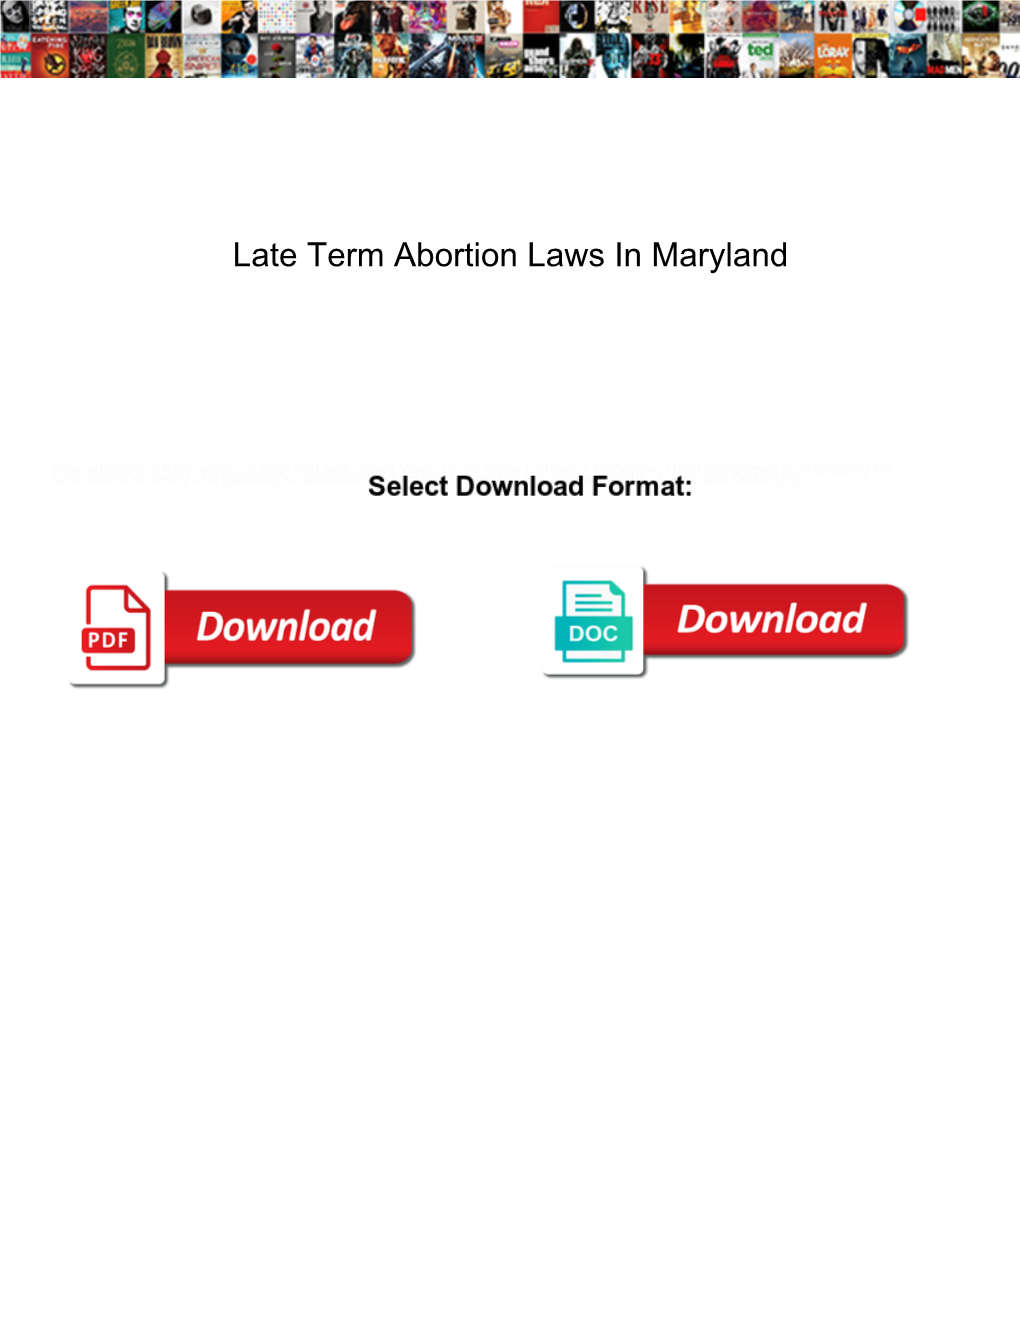 Late Term Abortion Laws in Maryland